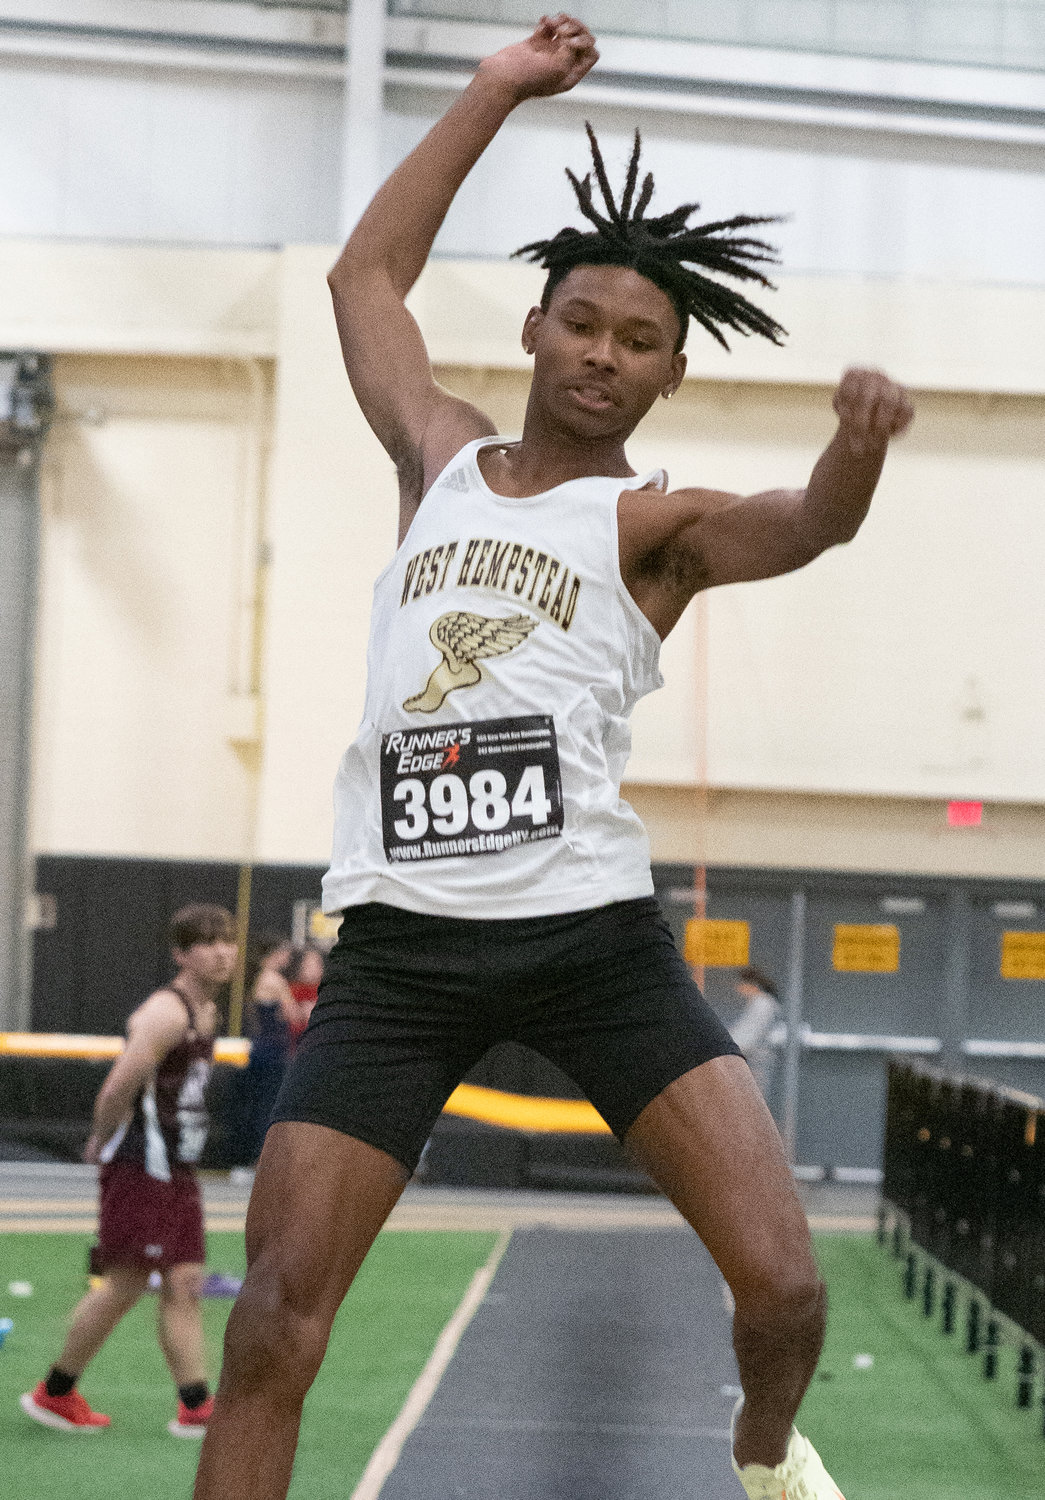 West Hempstead senior Jurrel Hall was a triple county champ for the second time in nine months and is headed to the state meet.